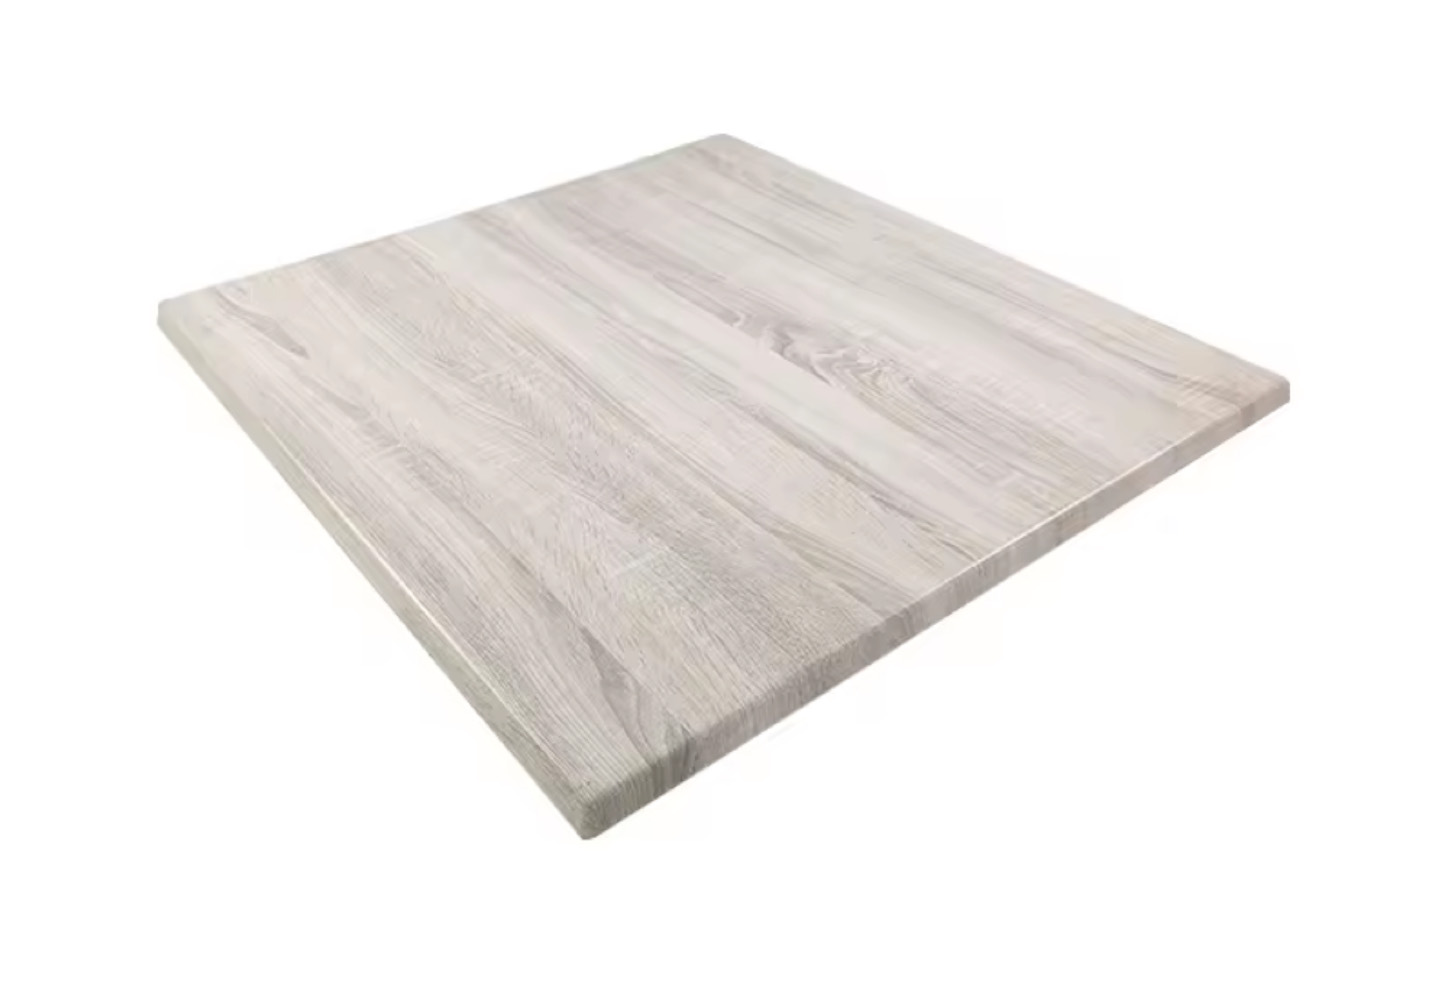 Clover custom compact laminate tabletop square 6